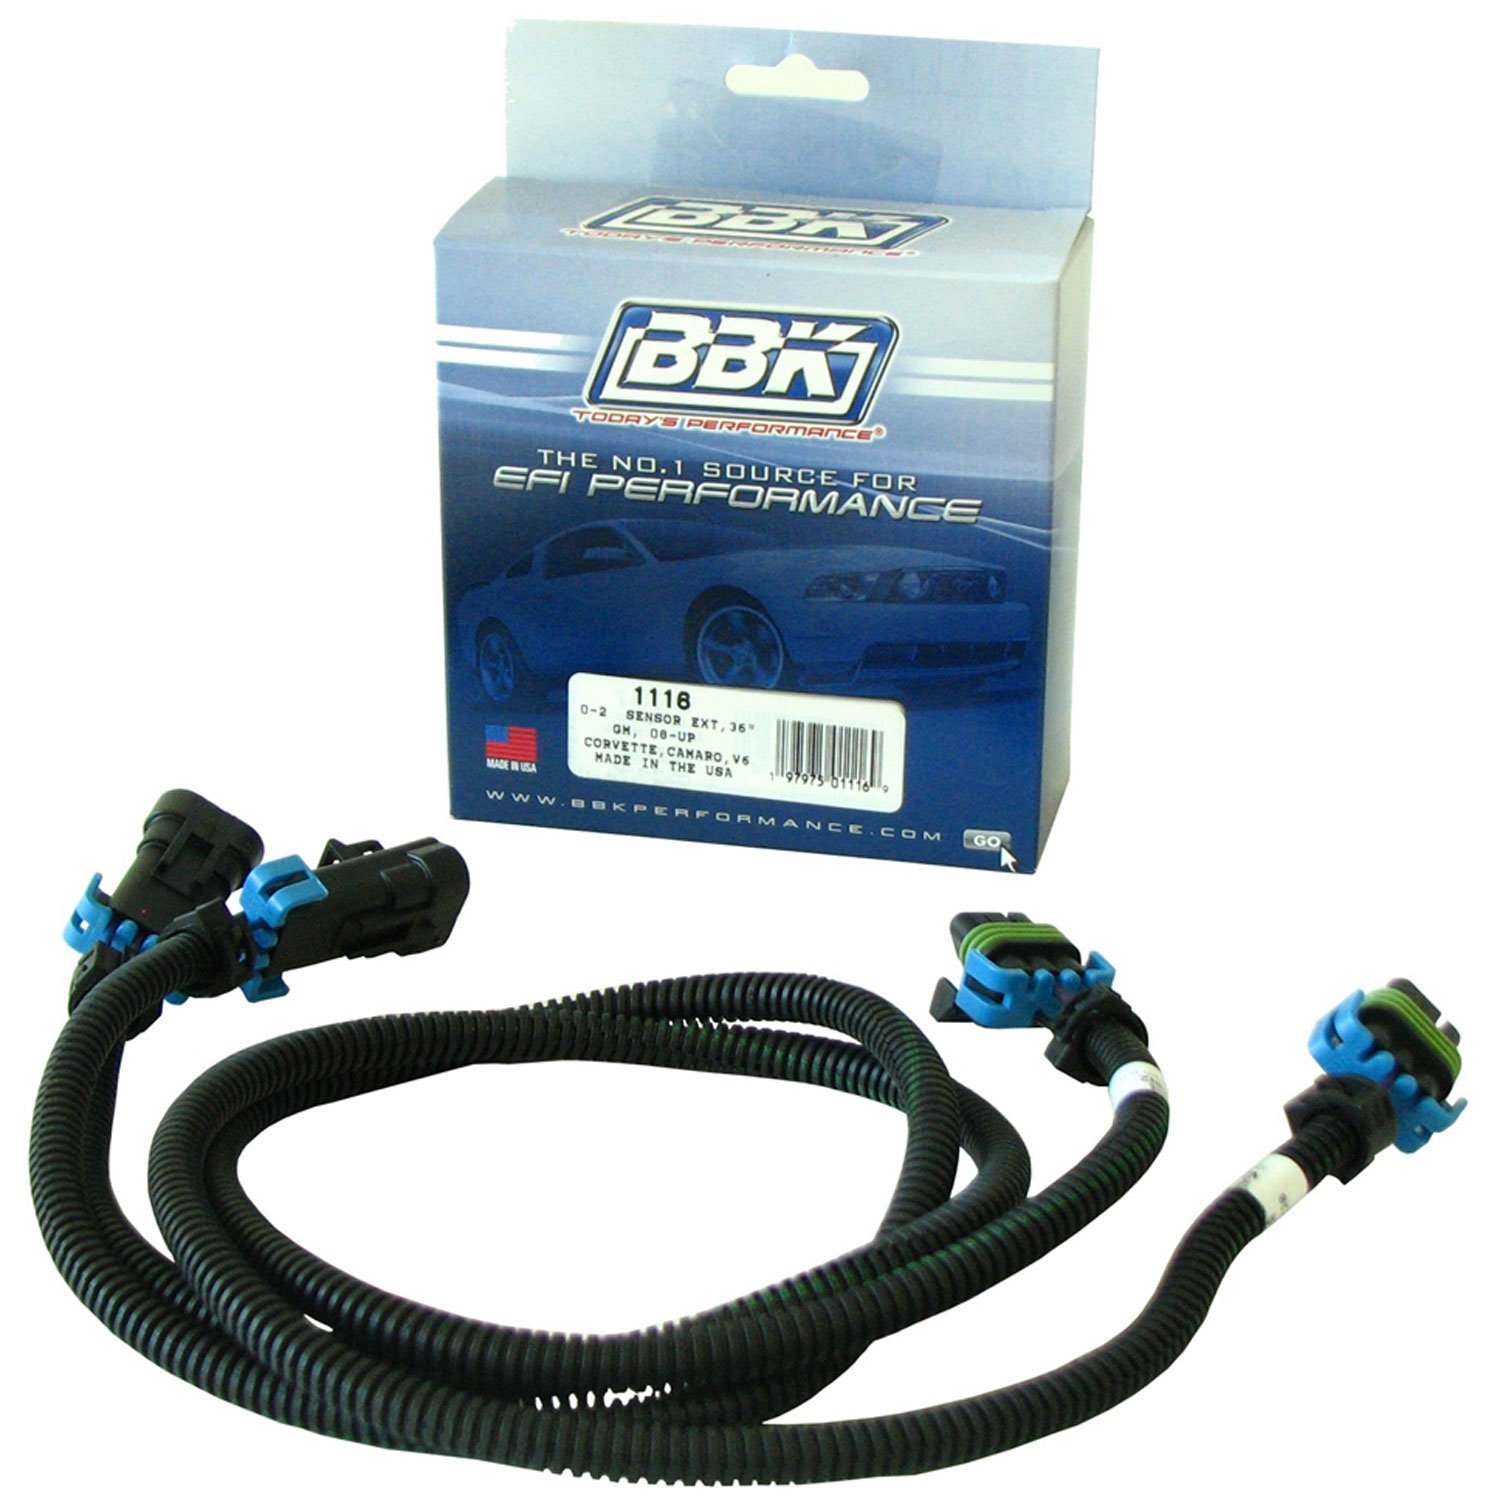 O2 Sensor Wire Harness Extension Kit 2008-13 GM (All Models)